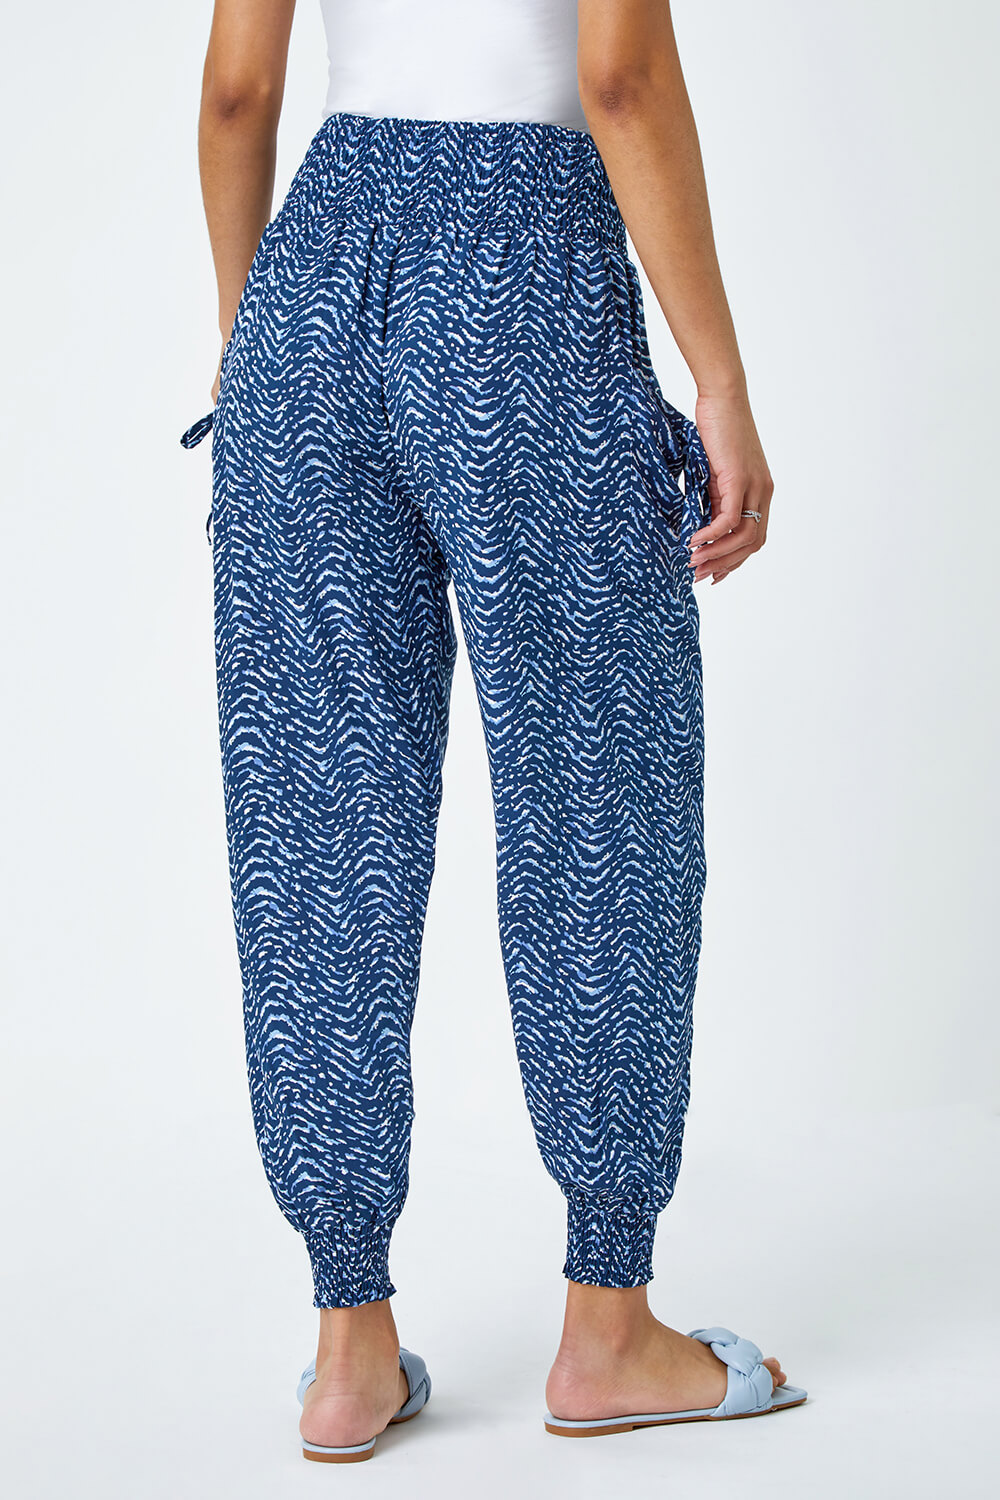 Blue Wave Print Stretch Hareem Trousers, Image 3 of 5